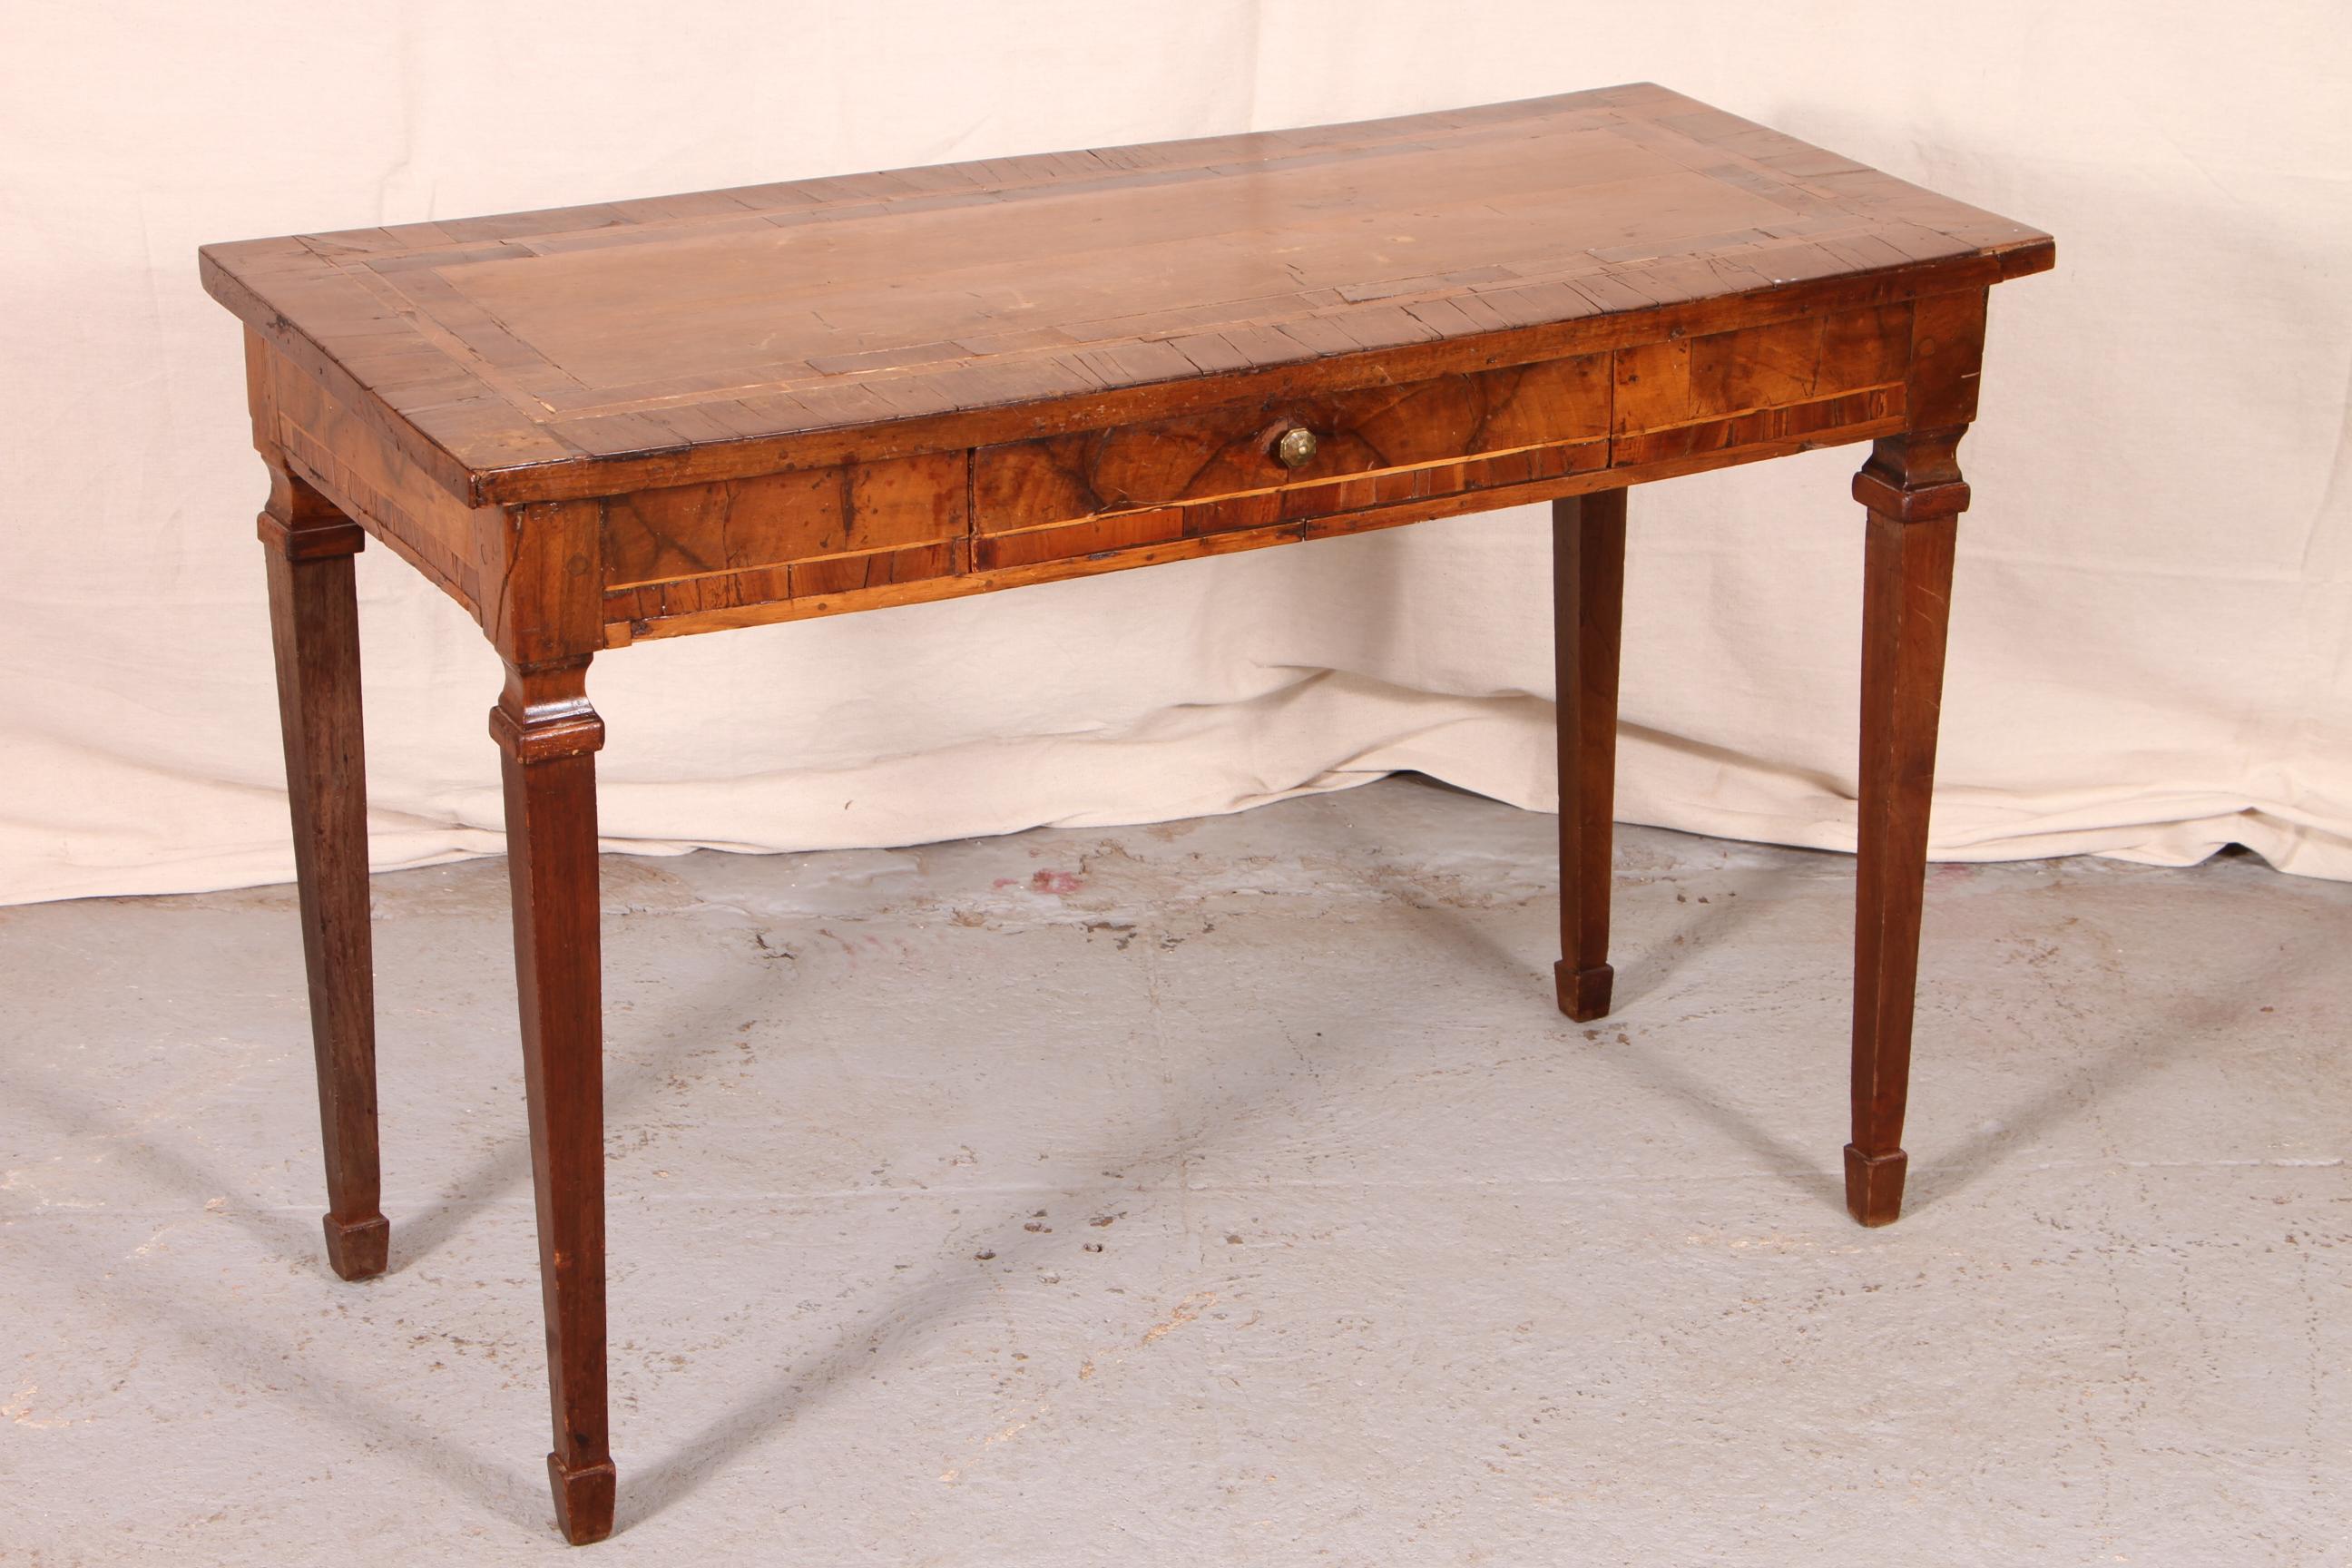 18th century Italian console, walnut, rectangular with a double banded top, the burled frieze banded in walnut with a single drawer on the front, and raised on tall square tapering legs with spade feet. 

Condition: Checking and cracks to banding